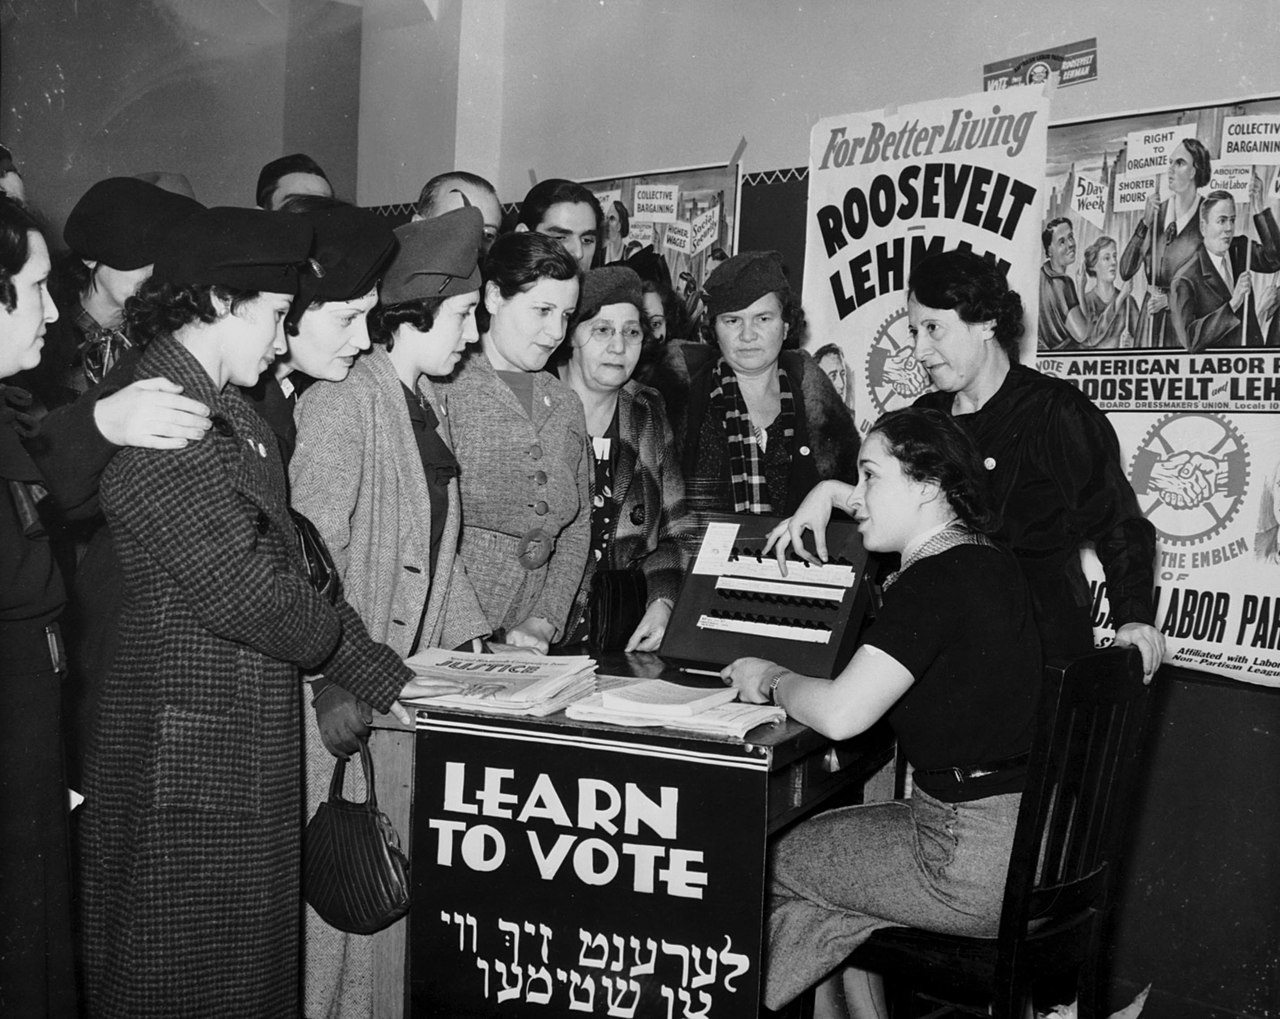 Women surrounded by posters in English and Yiddish supporting Franklin D. Roosevelt teach other women how to vote in 1935. International Ladies Garment Workers Union Photographs (1885-1985), Kheel Center for Labor-Management Documentation and Archives, Cornell University Library.
